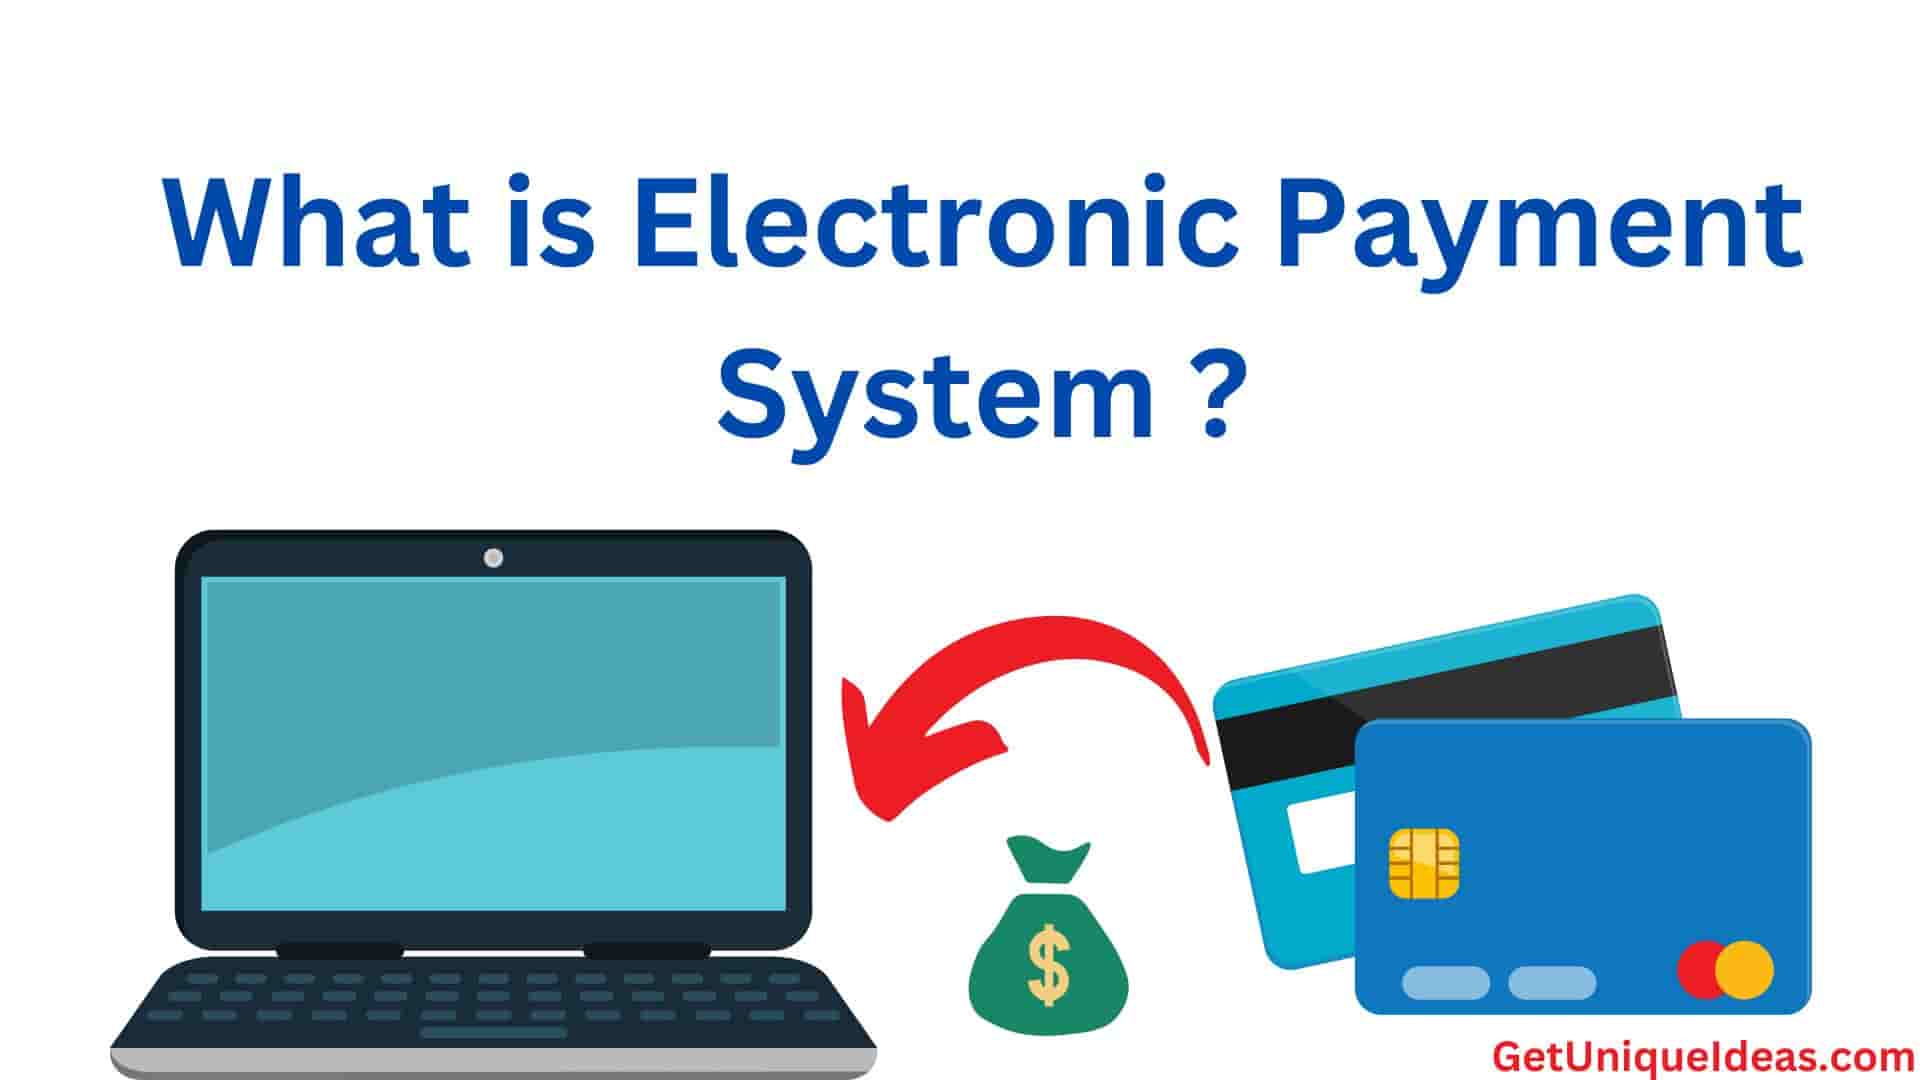 What is Electronic Payment System ?